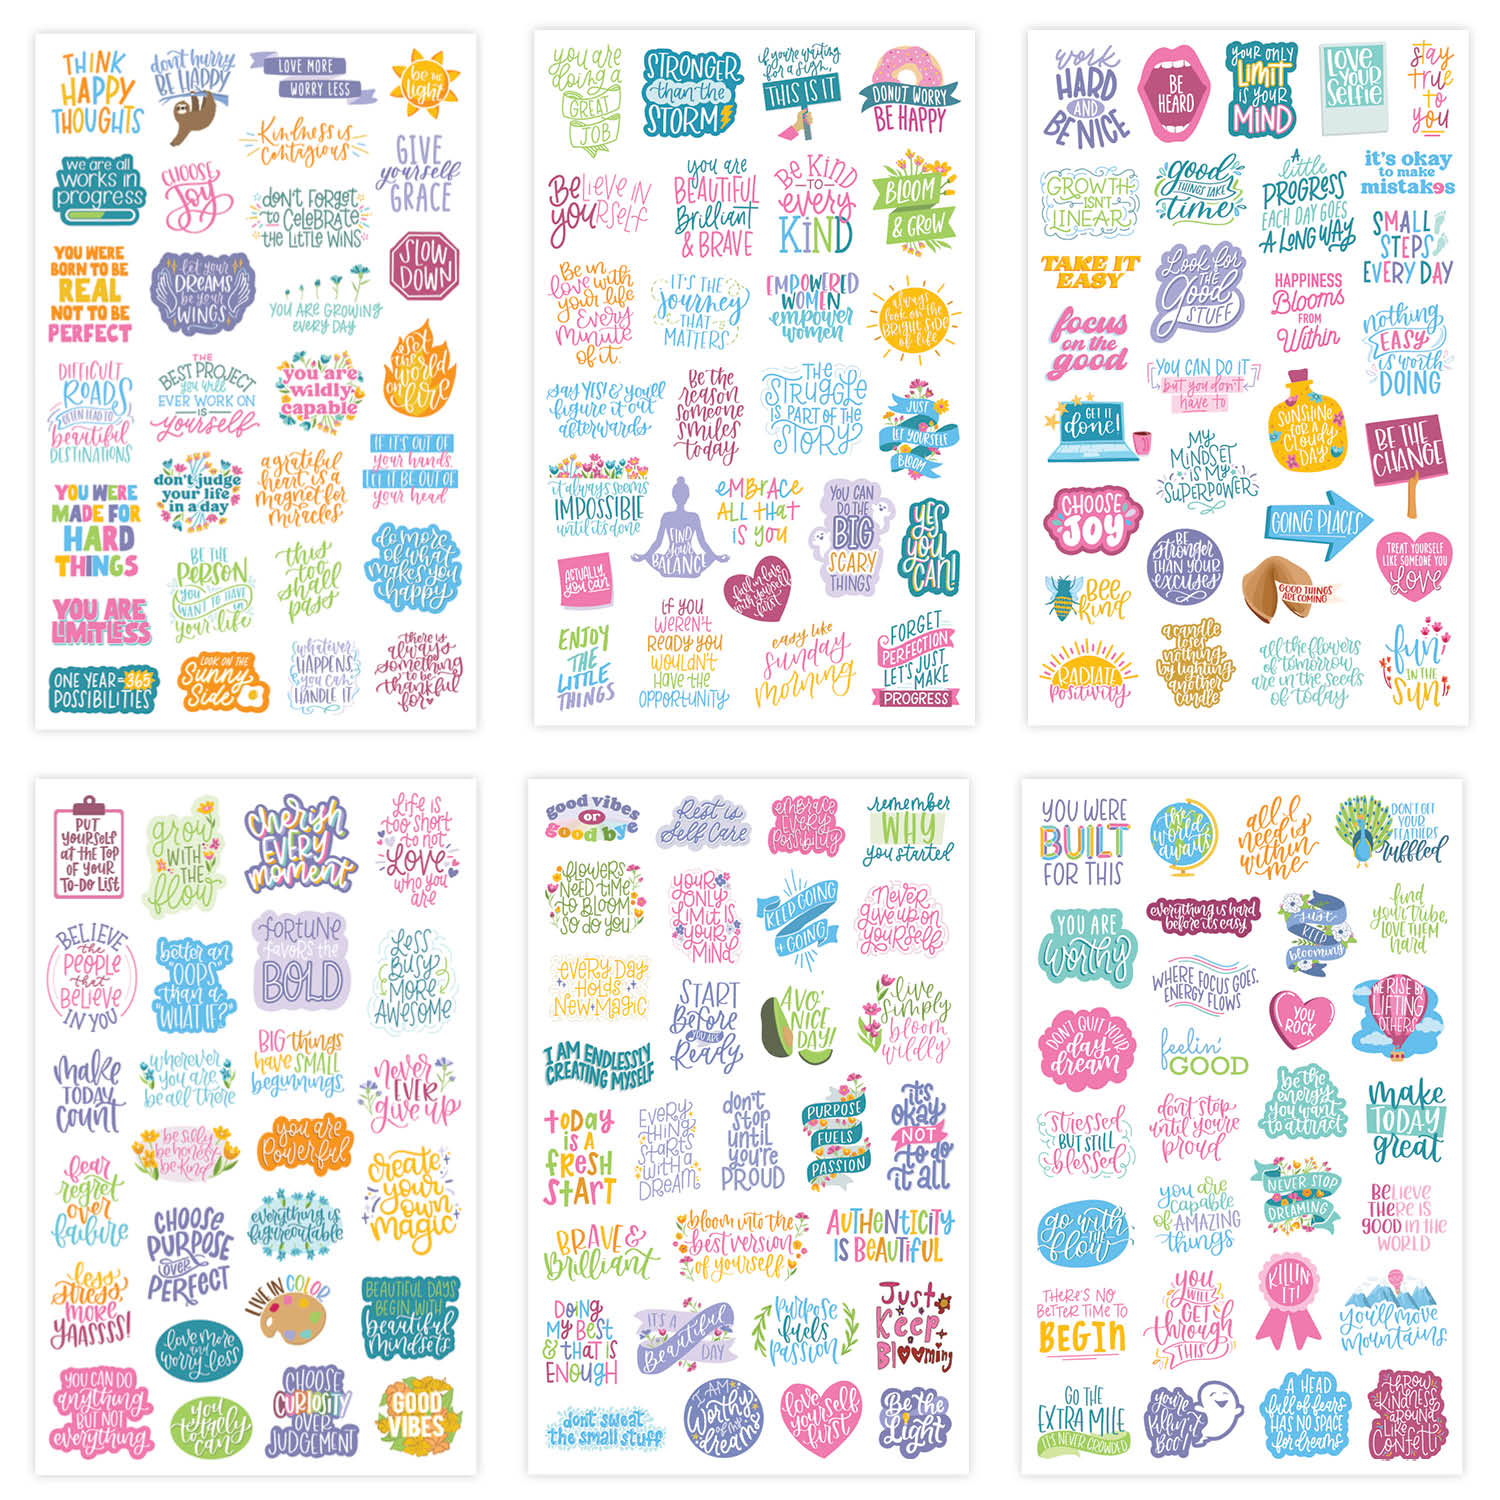 Inspirational Quote Sticker Pack by Bloom Daily Planners